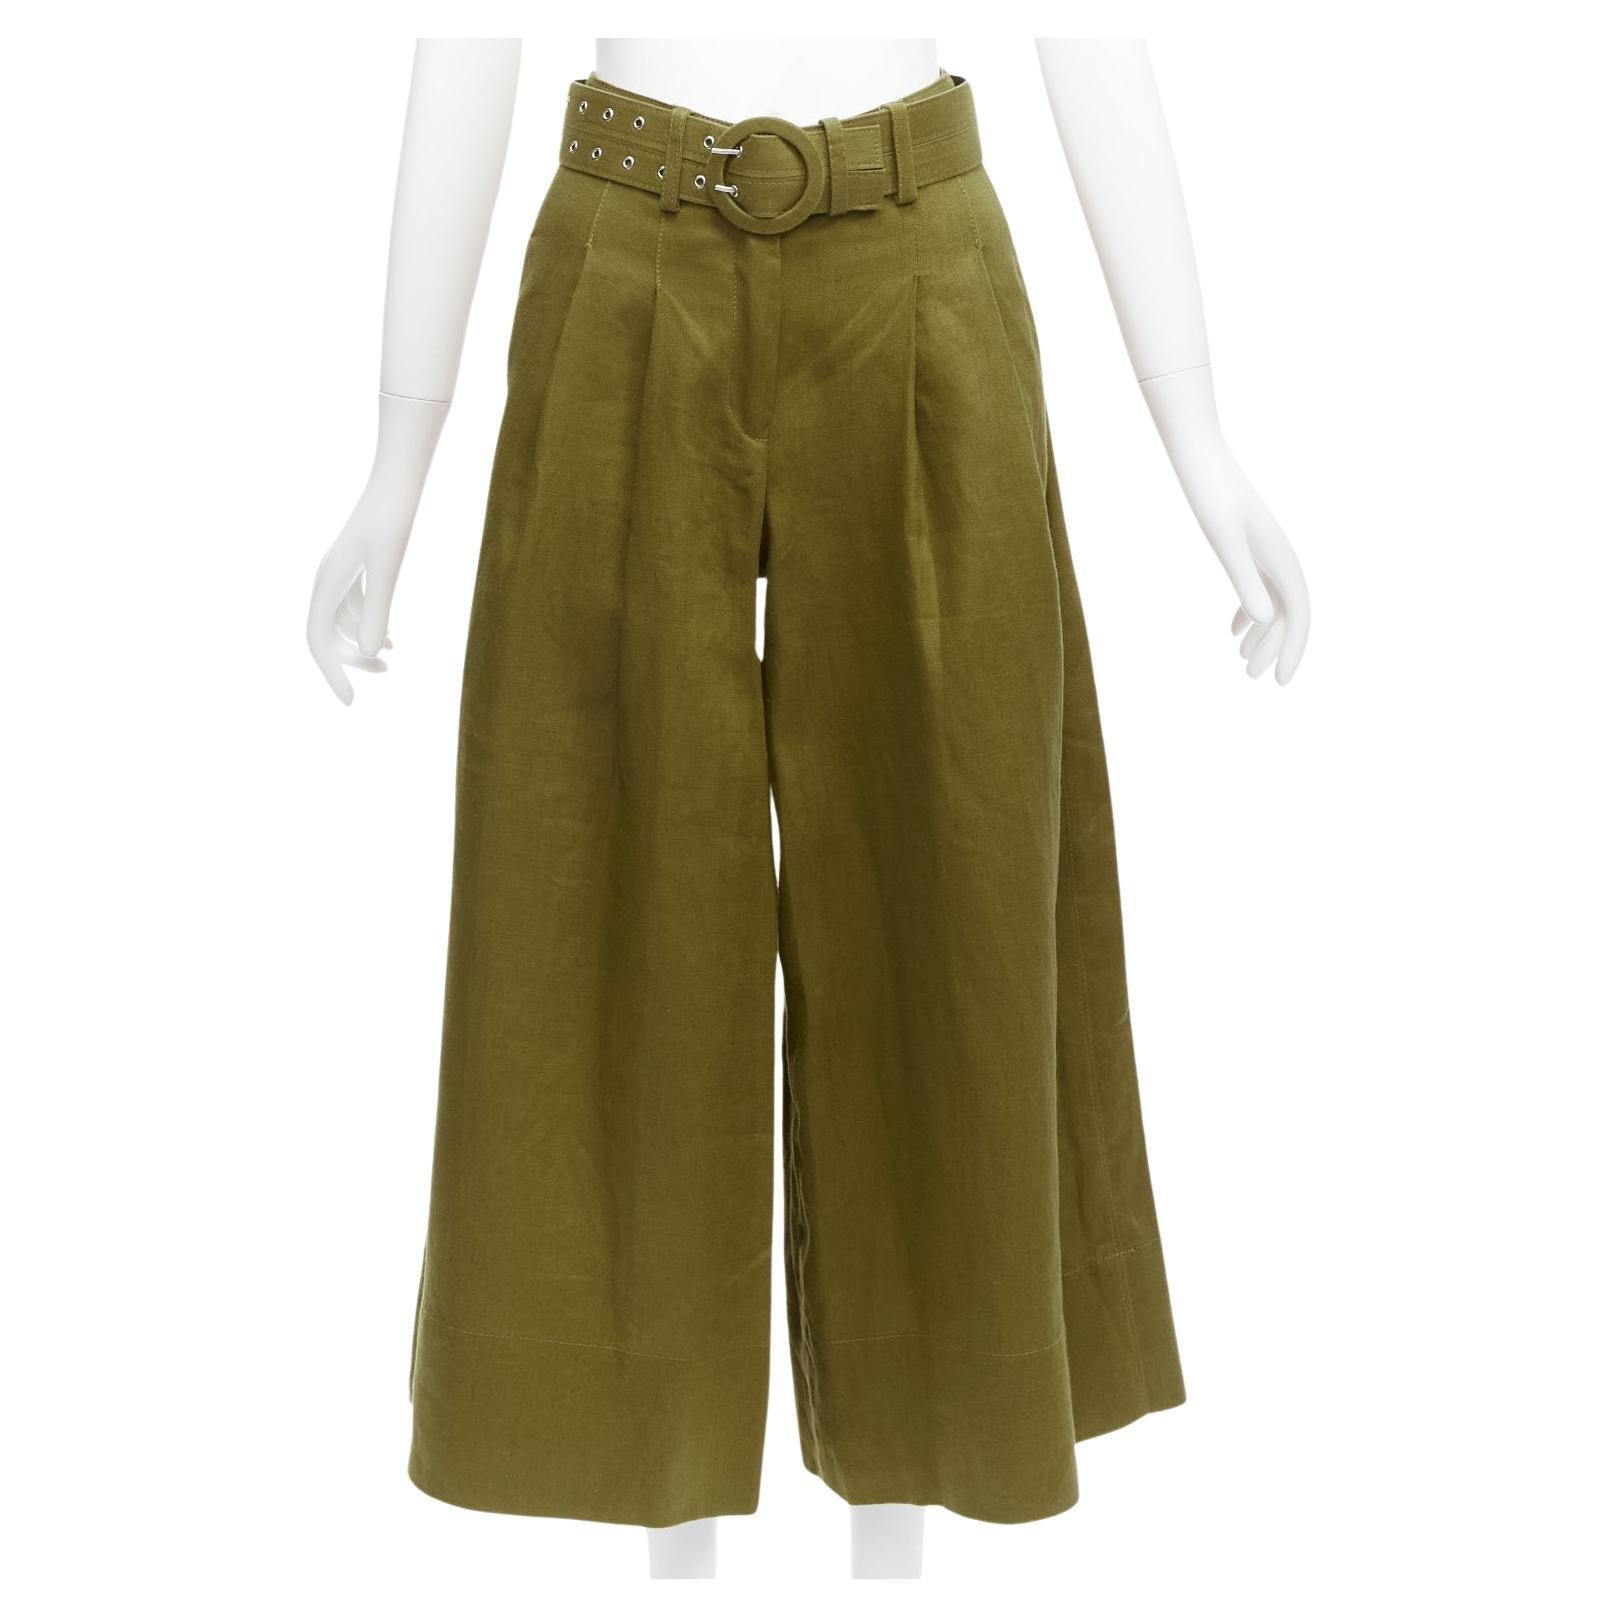 NICHOLAS military green 100% linen high waisted belted wide leg pants US6 M For Sale